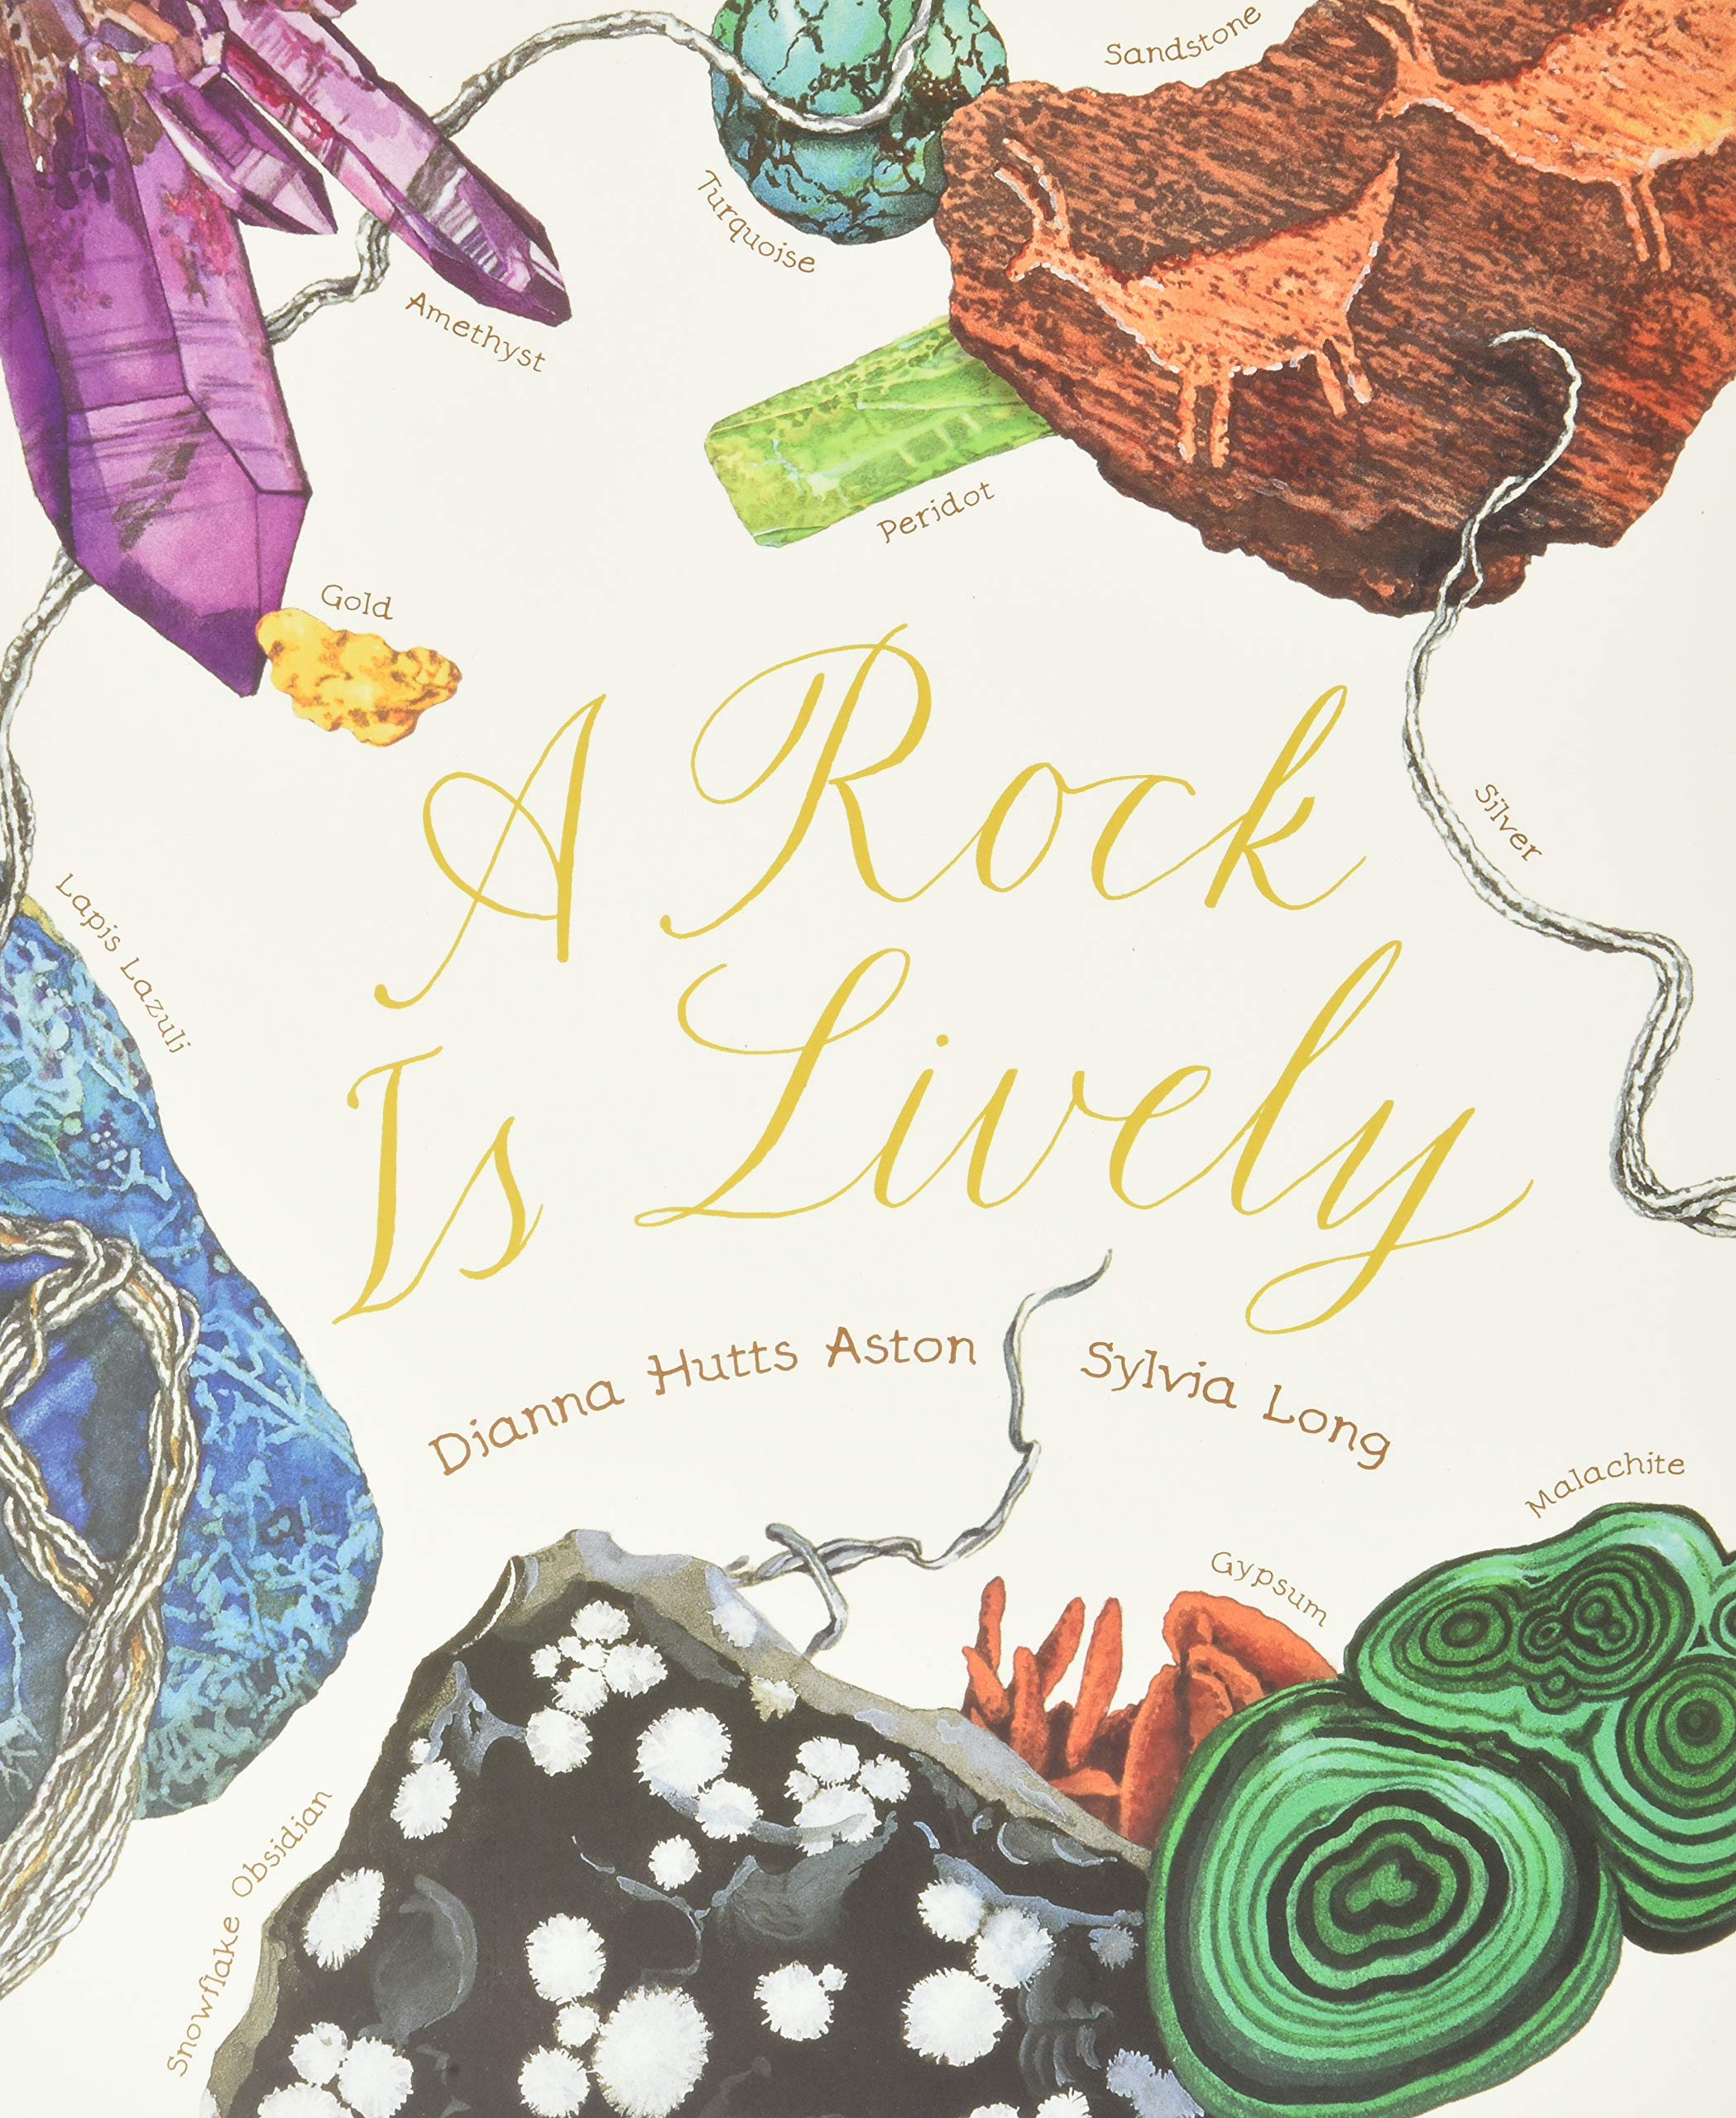 title and illustrations of various rocks